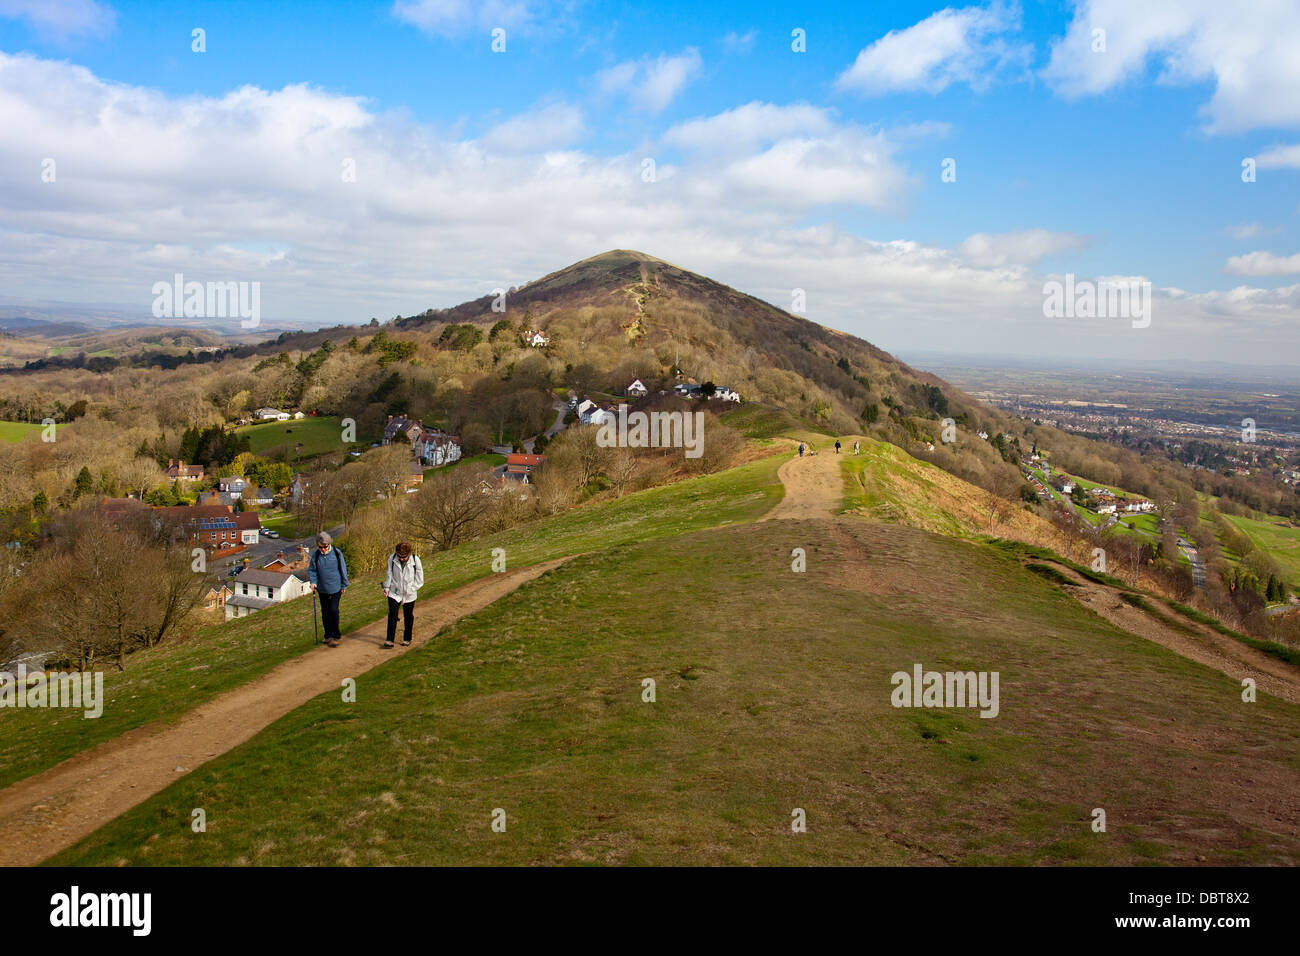 Worcestershire Beacon, the highest point of the Malvern Hills from Perseverance Hill, Worcestershire, England, UK Stock Photo